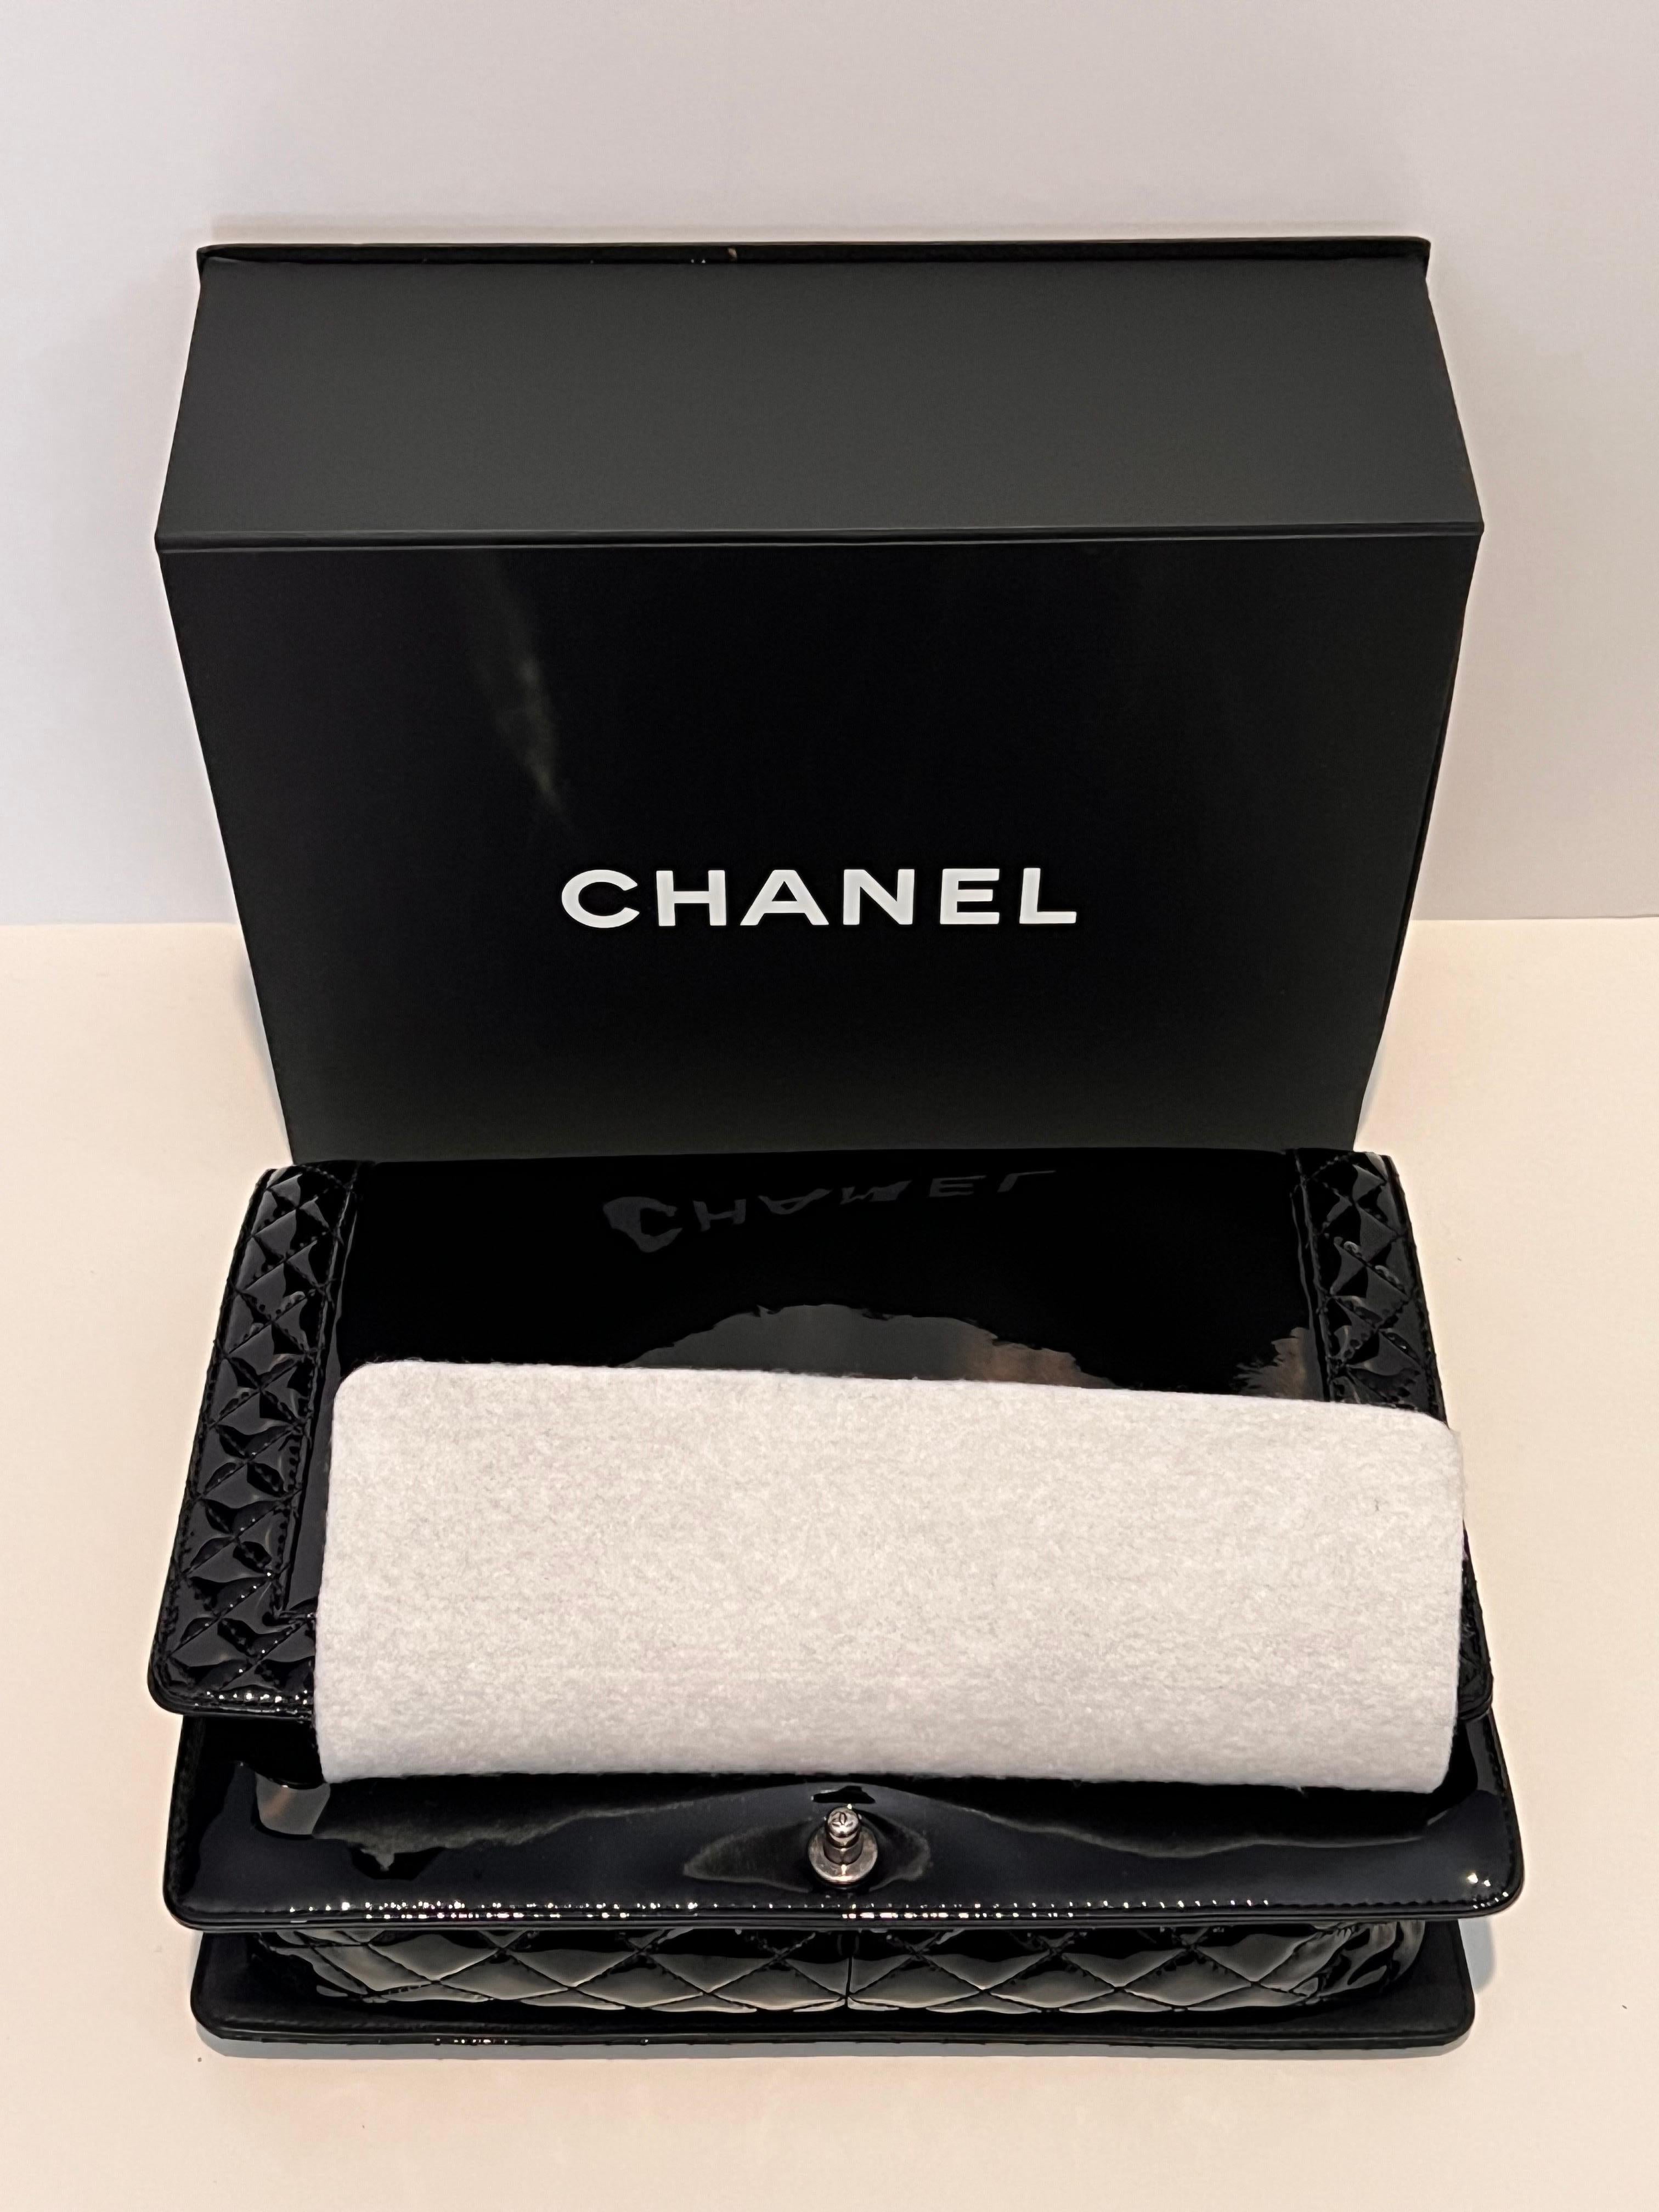 Chanel Extra Large Patent Boy Bag never used, new in the box! Mint condition  1